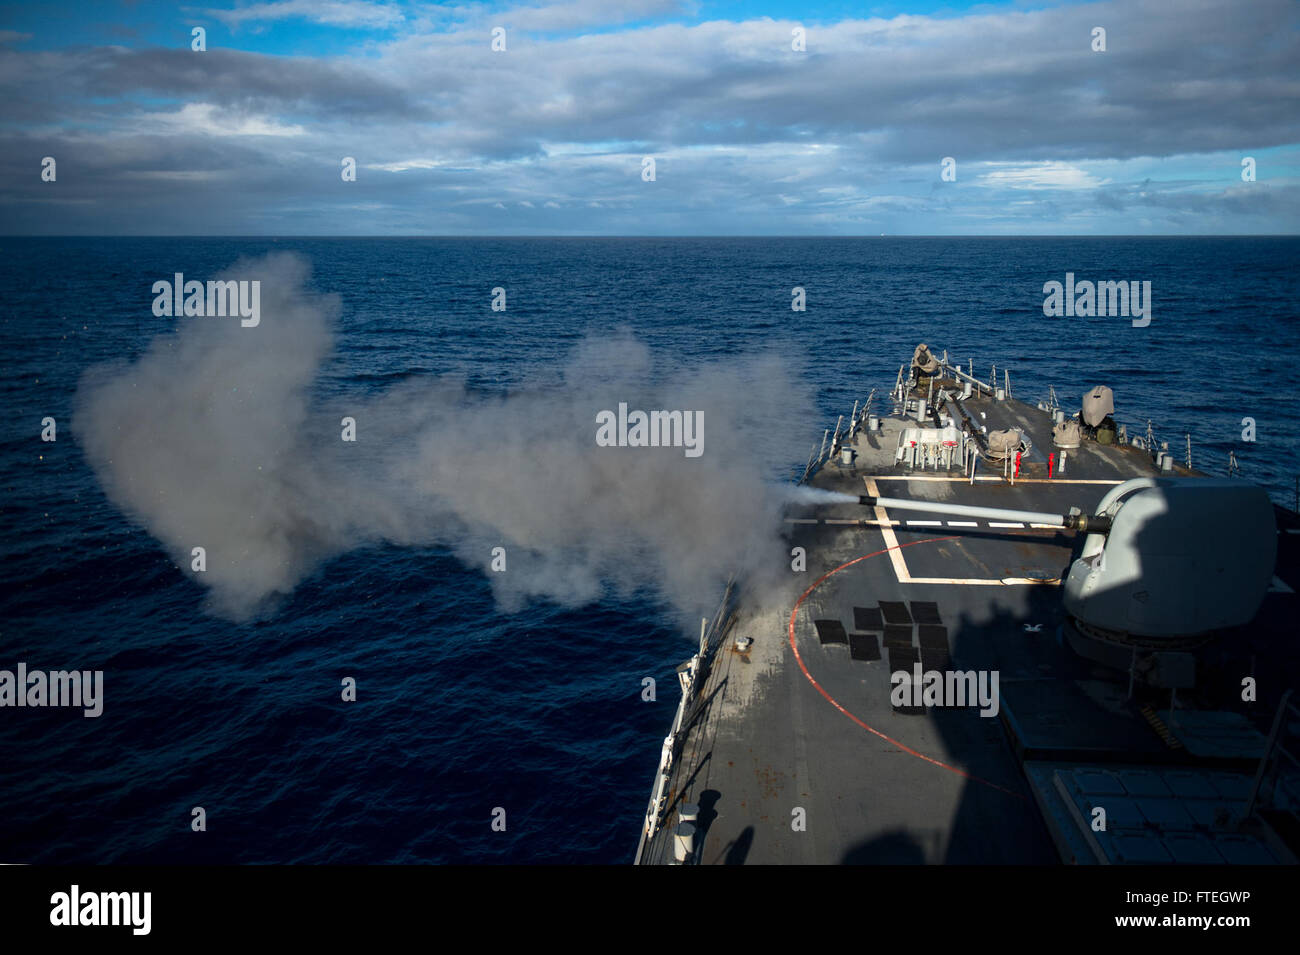 MEDITERRANEAN SEA (Oct. 7, 2014) The guided-missile destroyer USS Arleigh Burke (DDG 51) fires its MK 45 5-inch gun during a live-fire exercise. Arleigh Burke, homeported in Norfolk, Va., is conducting naval operations in the U.S. 6th Fleet area of operations in support of U.S. national security interests in Europe. Stock Photo